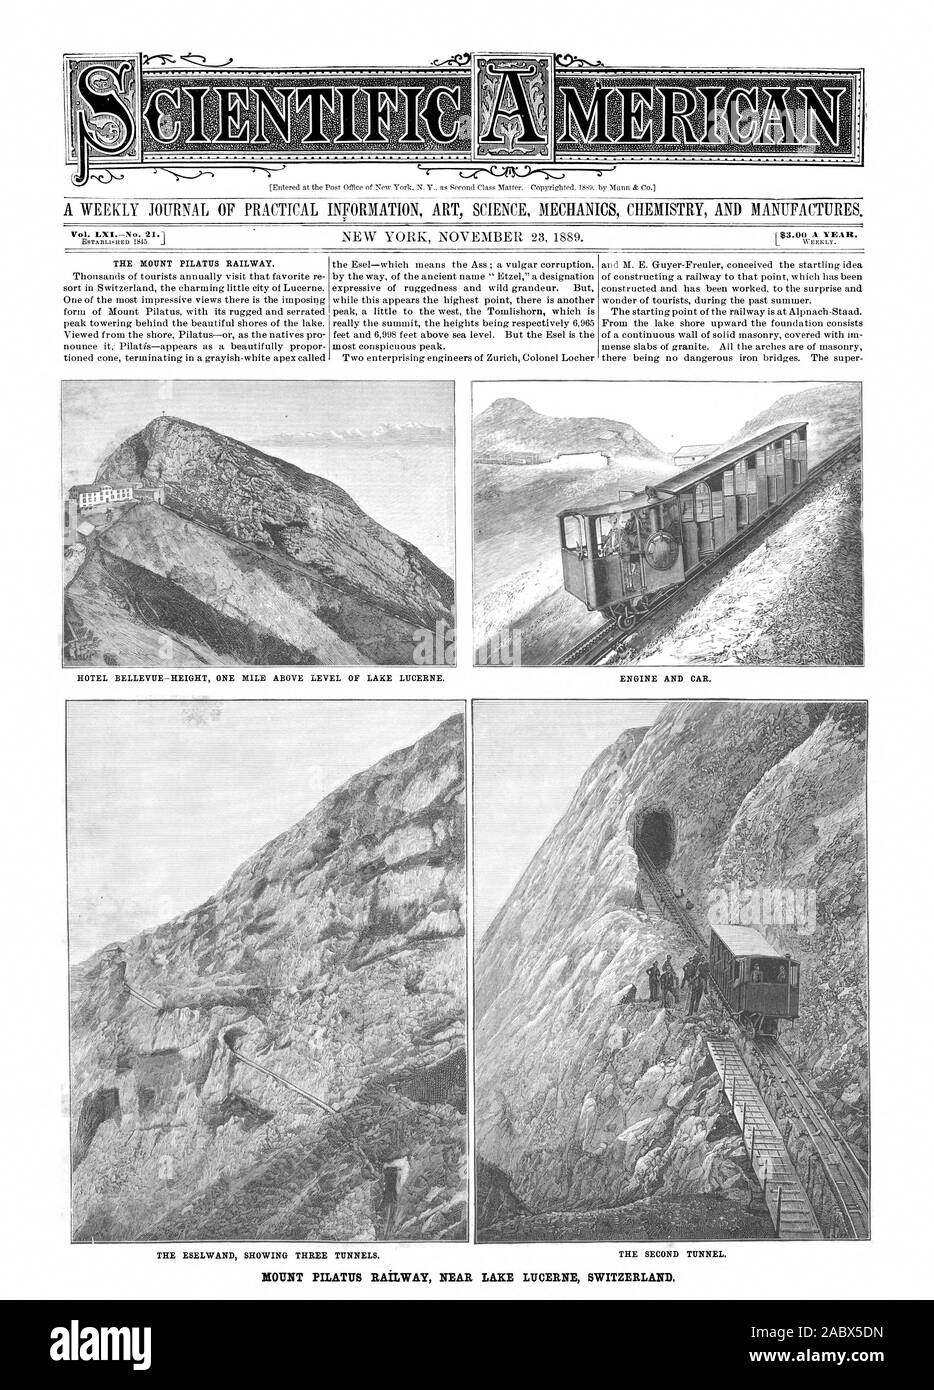 Entered at the Post Office of New York N. Y. as second Class Matter. Copyrighted. 1889. by Munn & Co. THE MOUNT PILATUS RAILWAY. MOUNT PILATUS RAILWAY NEAR LAKE LUCERNE SWITZERLAND., scientific american, 1889-11-23 Stock Photo